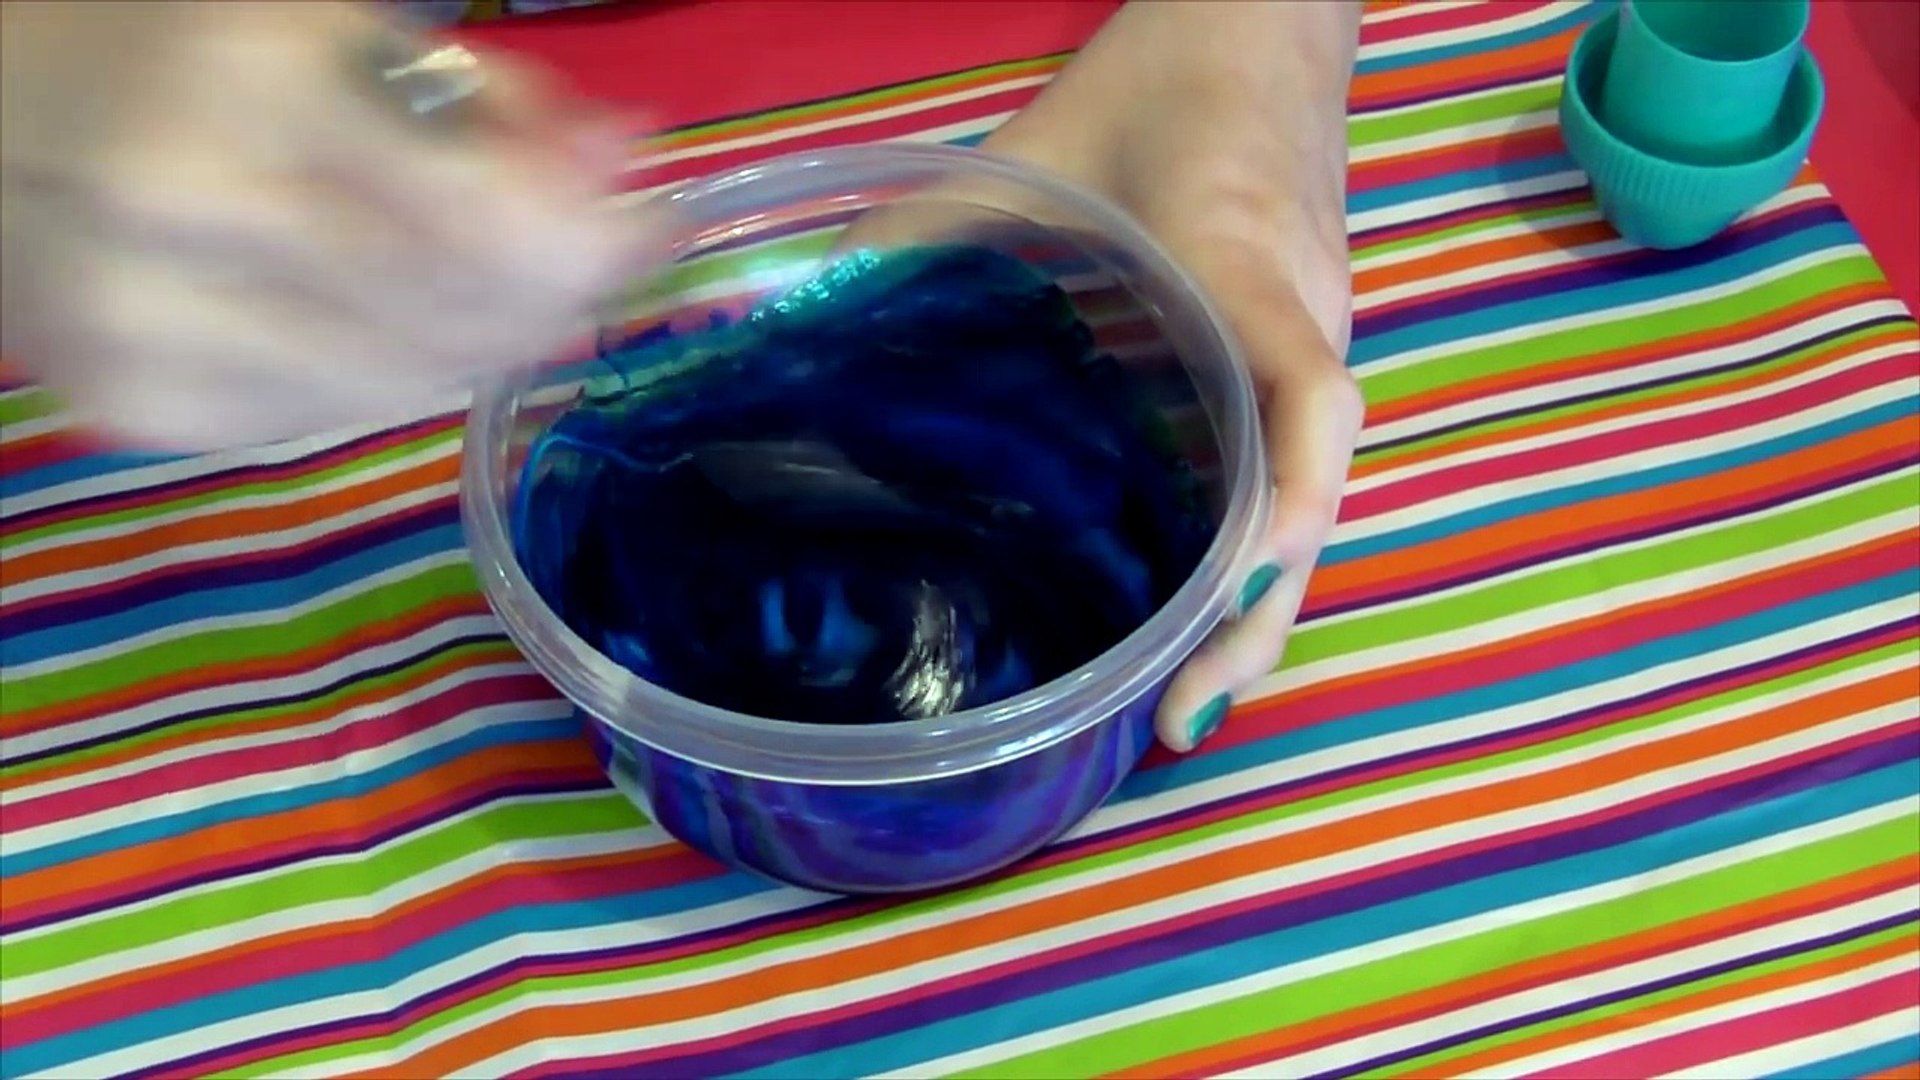 Diy Slime Without Activator How To Make Slime With Wood Glue No Borax